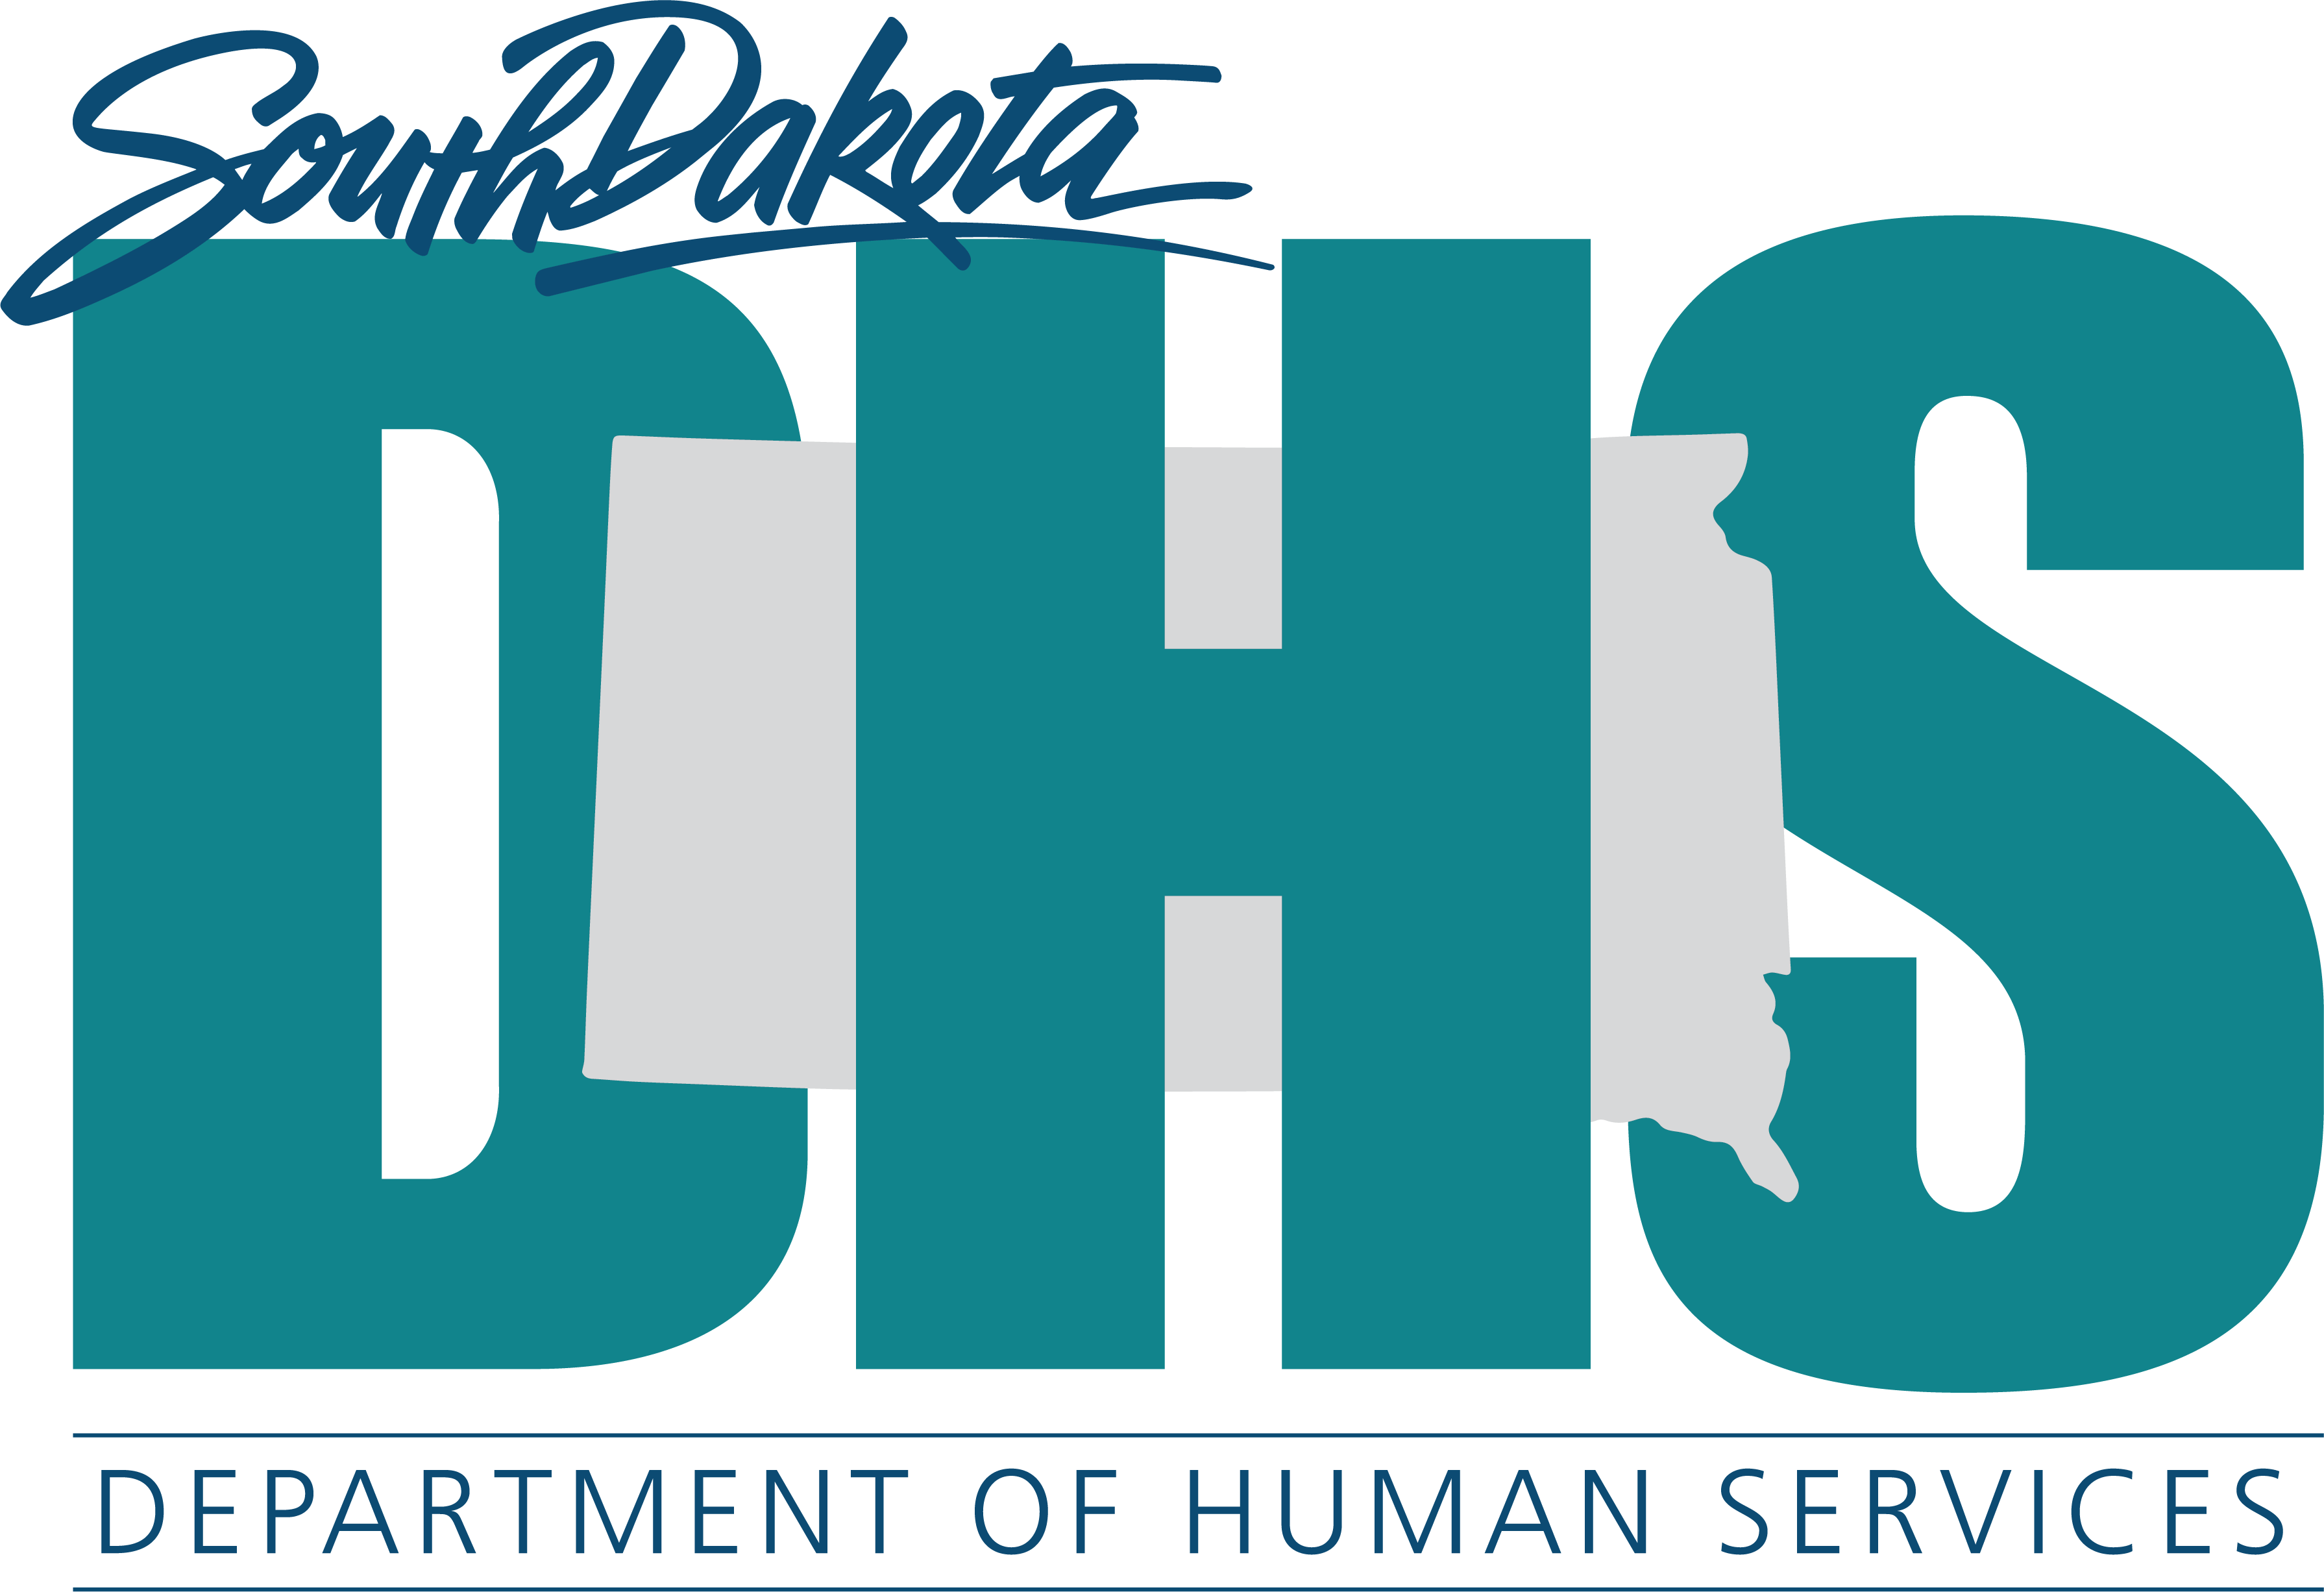 SD Department of Human Services, Division of Long Term Services and Supports